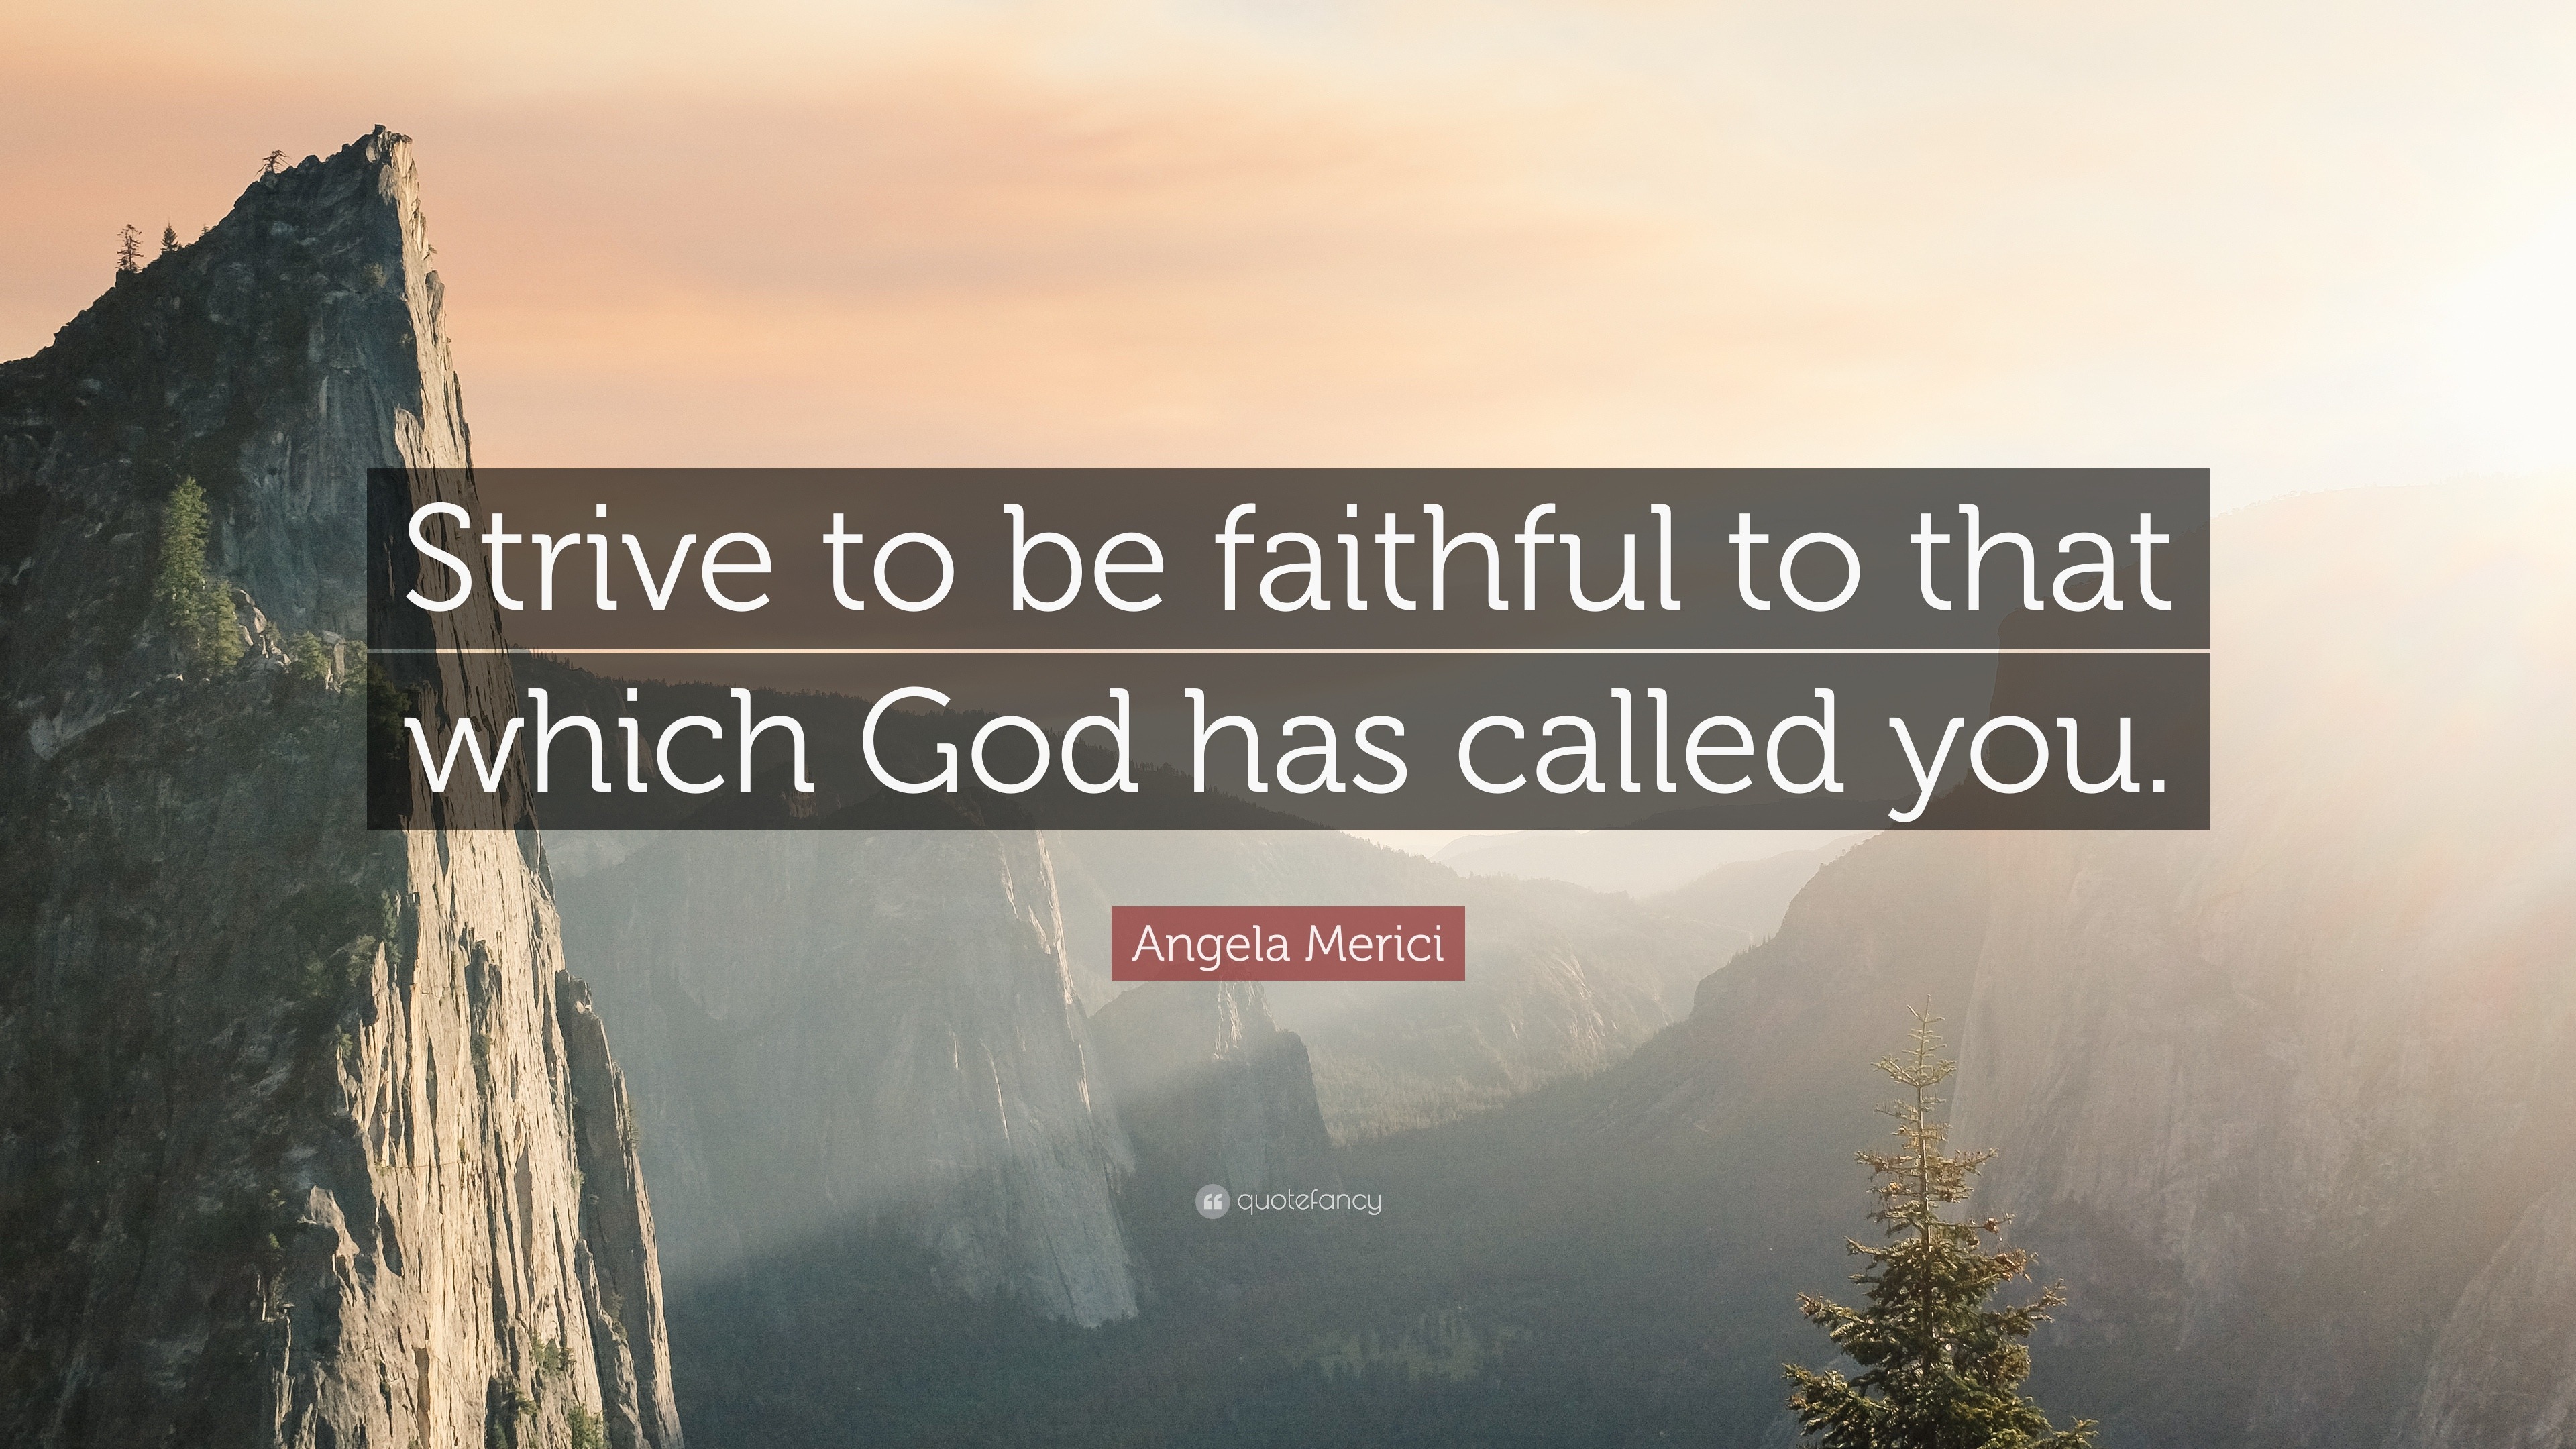 Angela Merici Quote “Strive to be faithful to that which God has